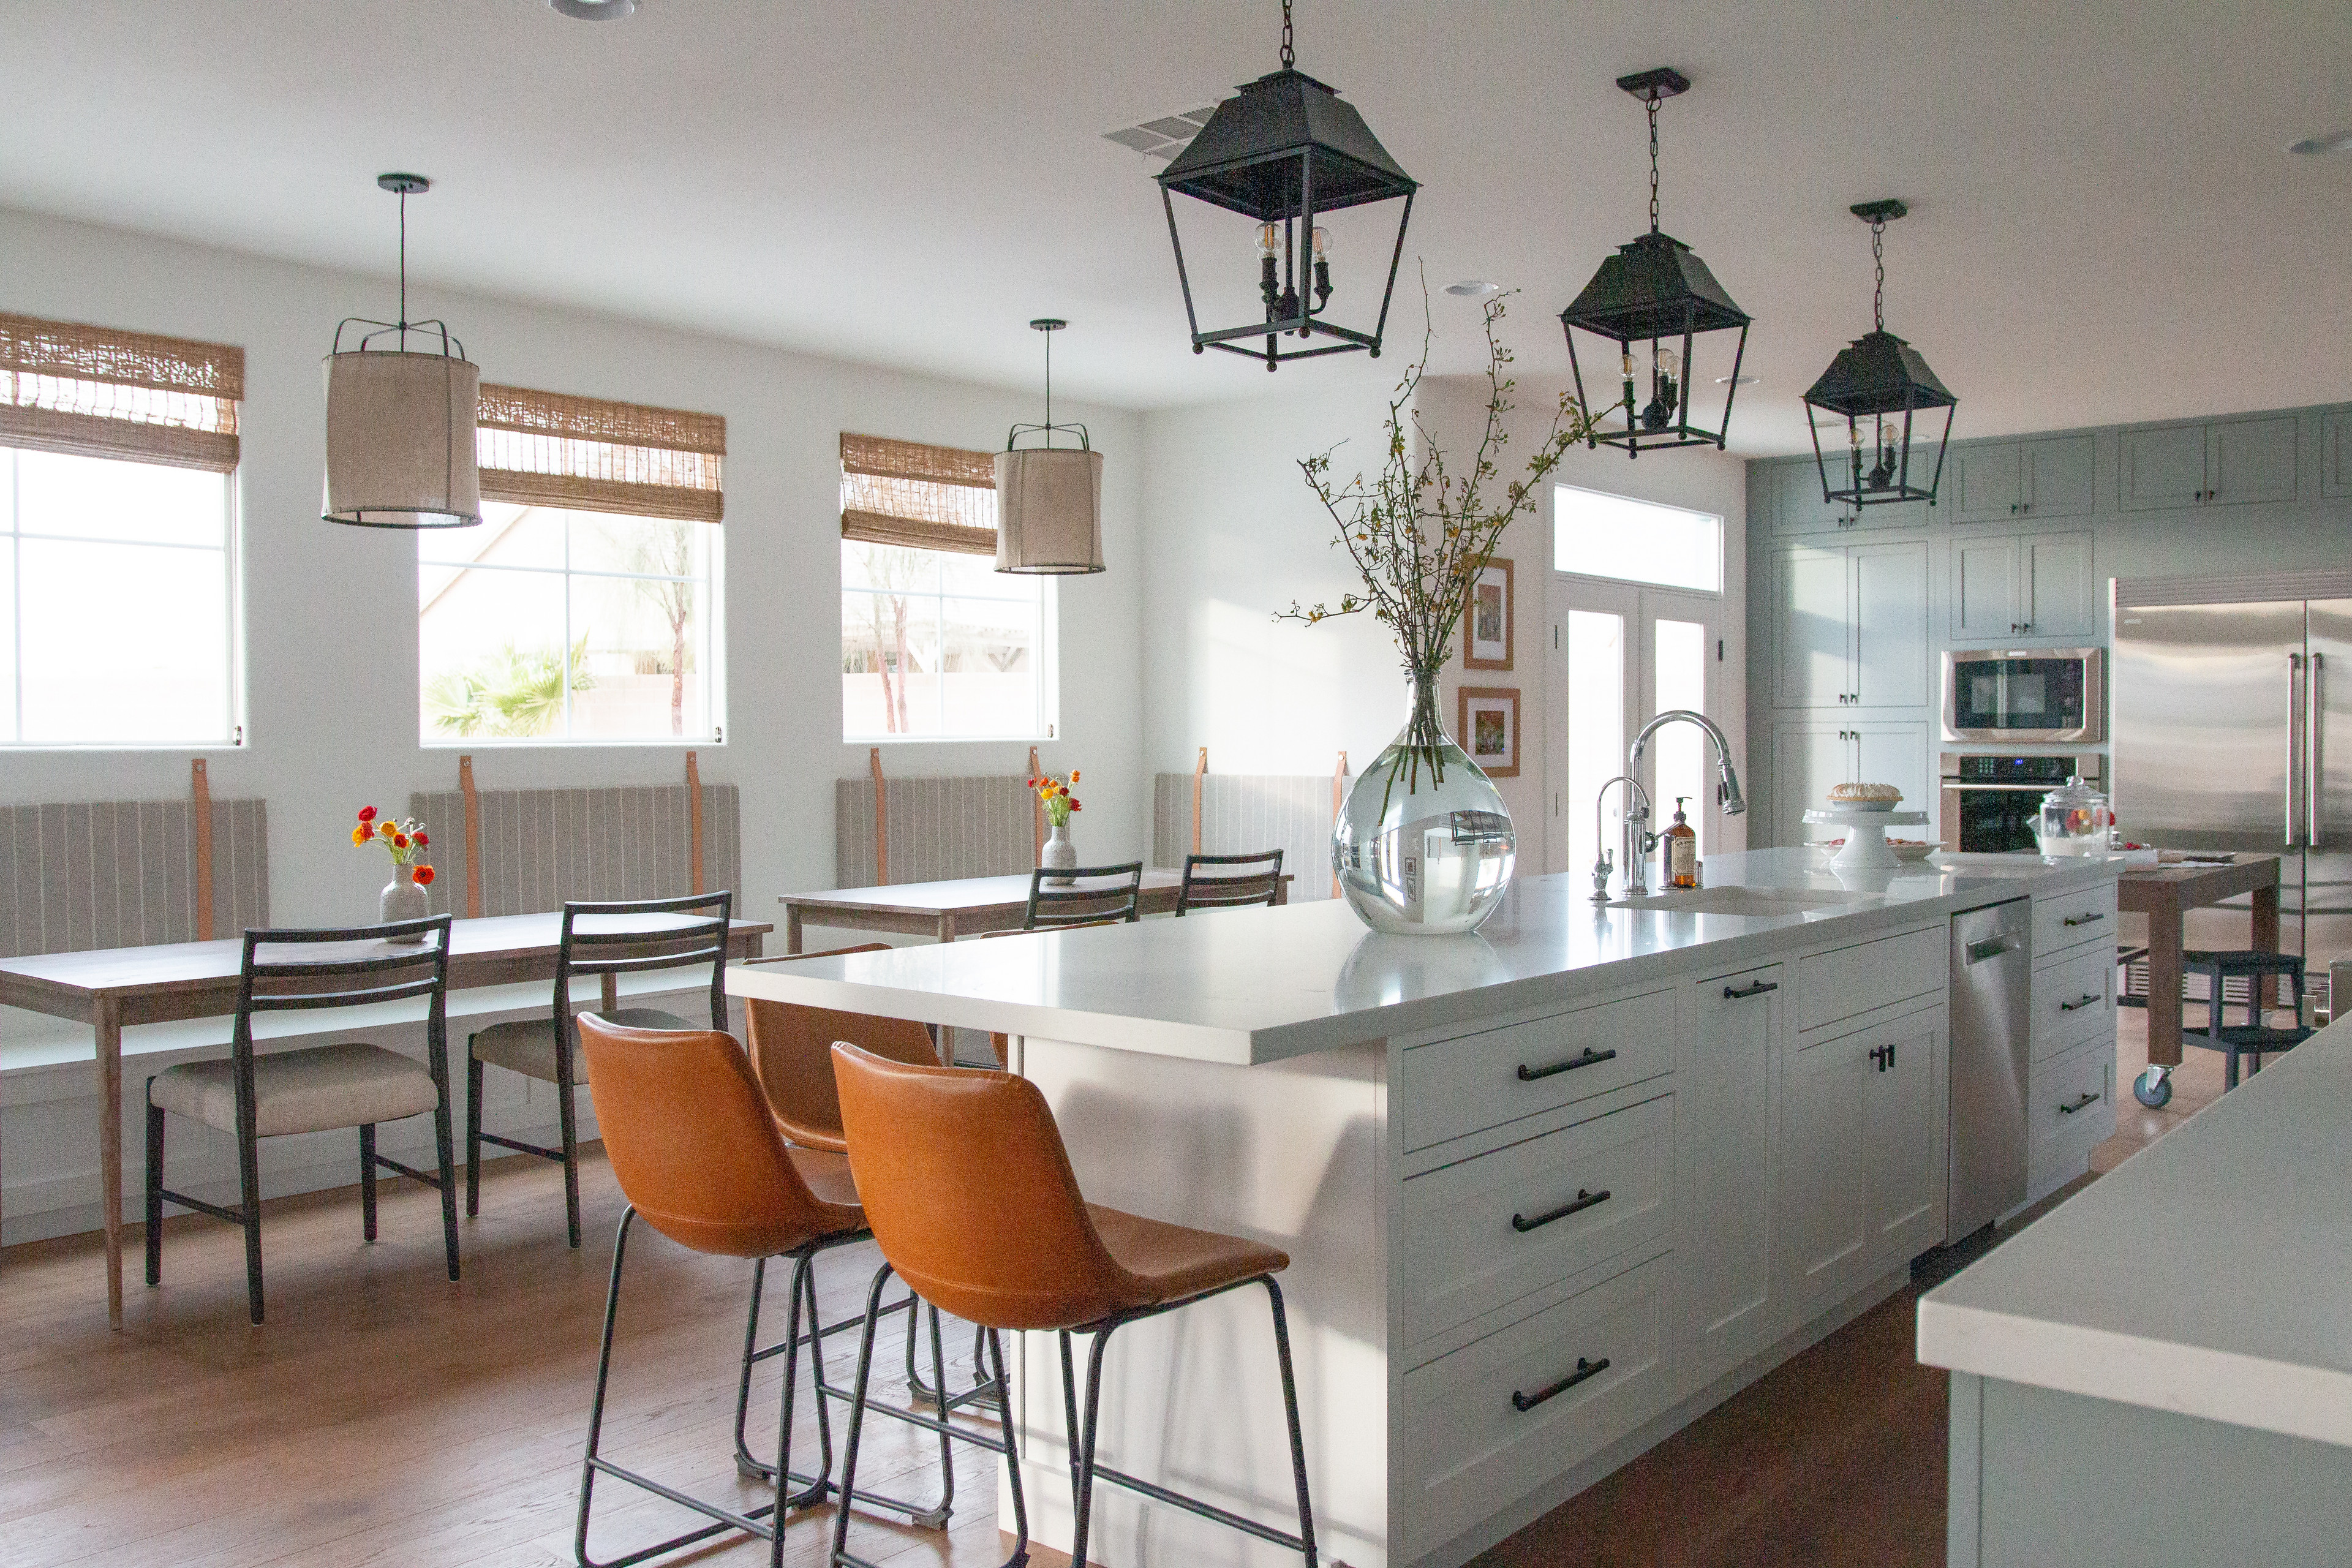 Extended Kitchen Remodel (as seen on Property Brothers)